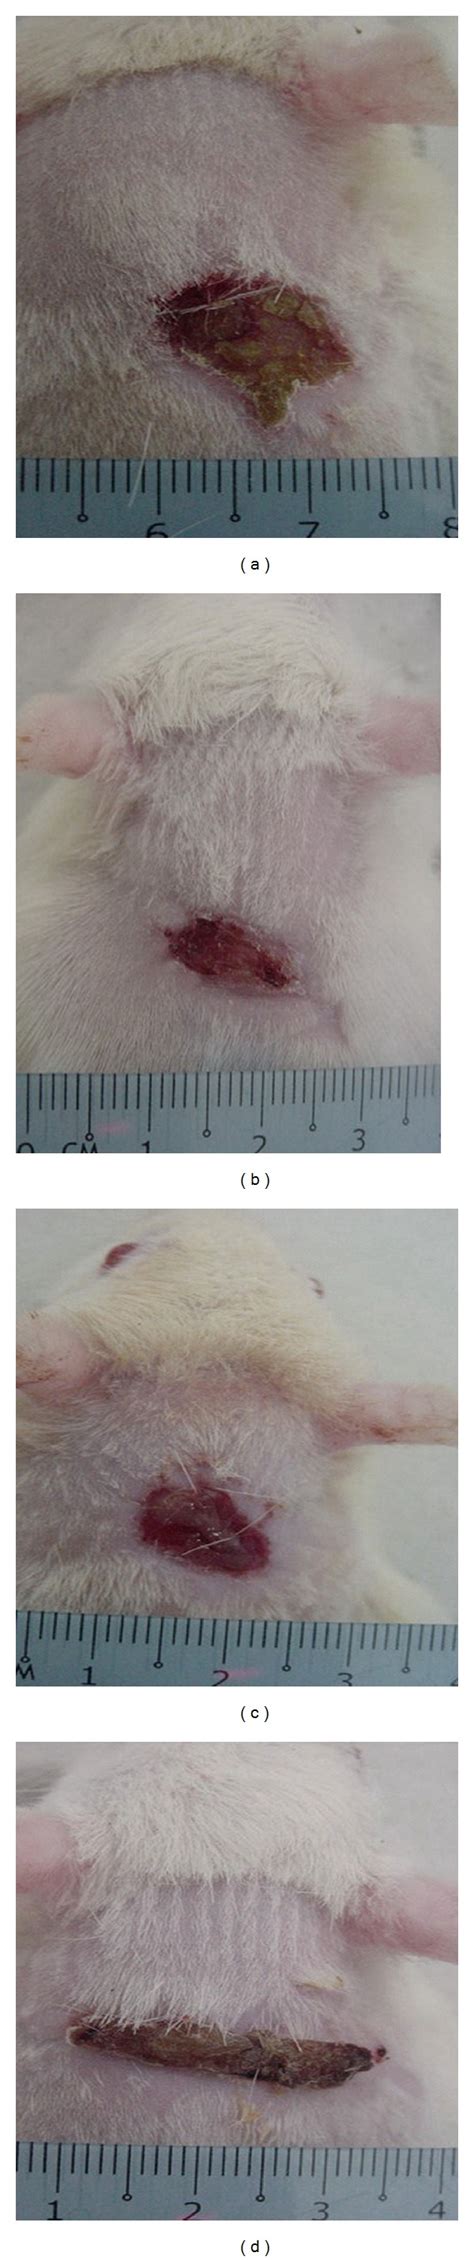 Macroscopic Appearance Of The Wounds On Day 10 After Surgery In